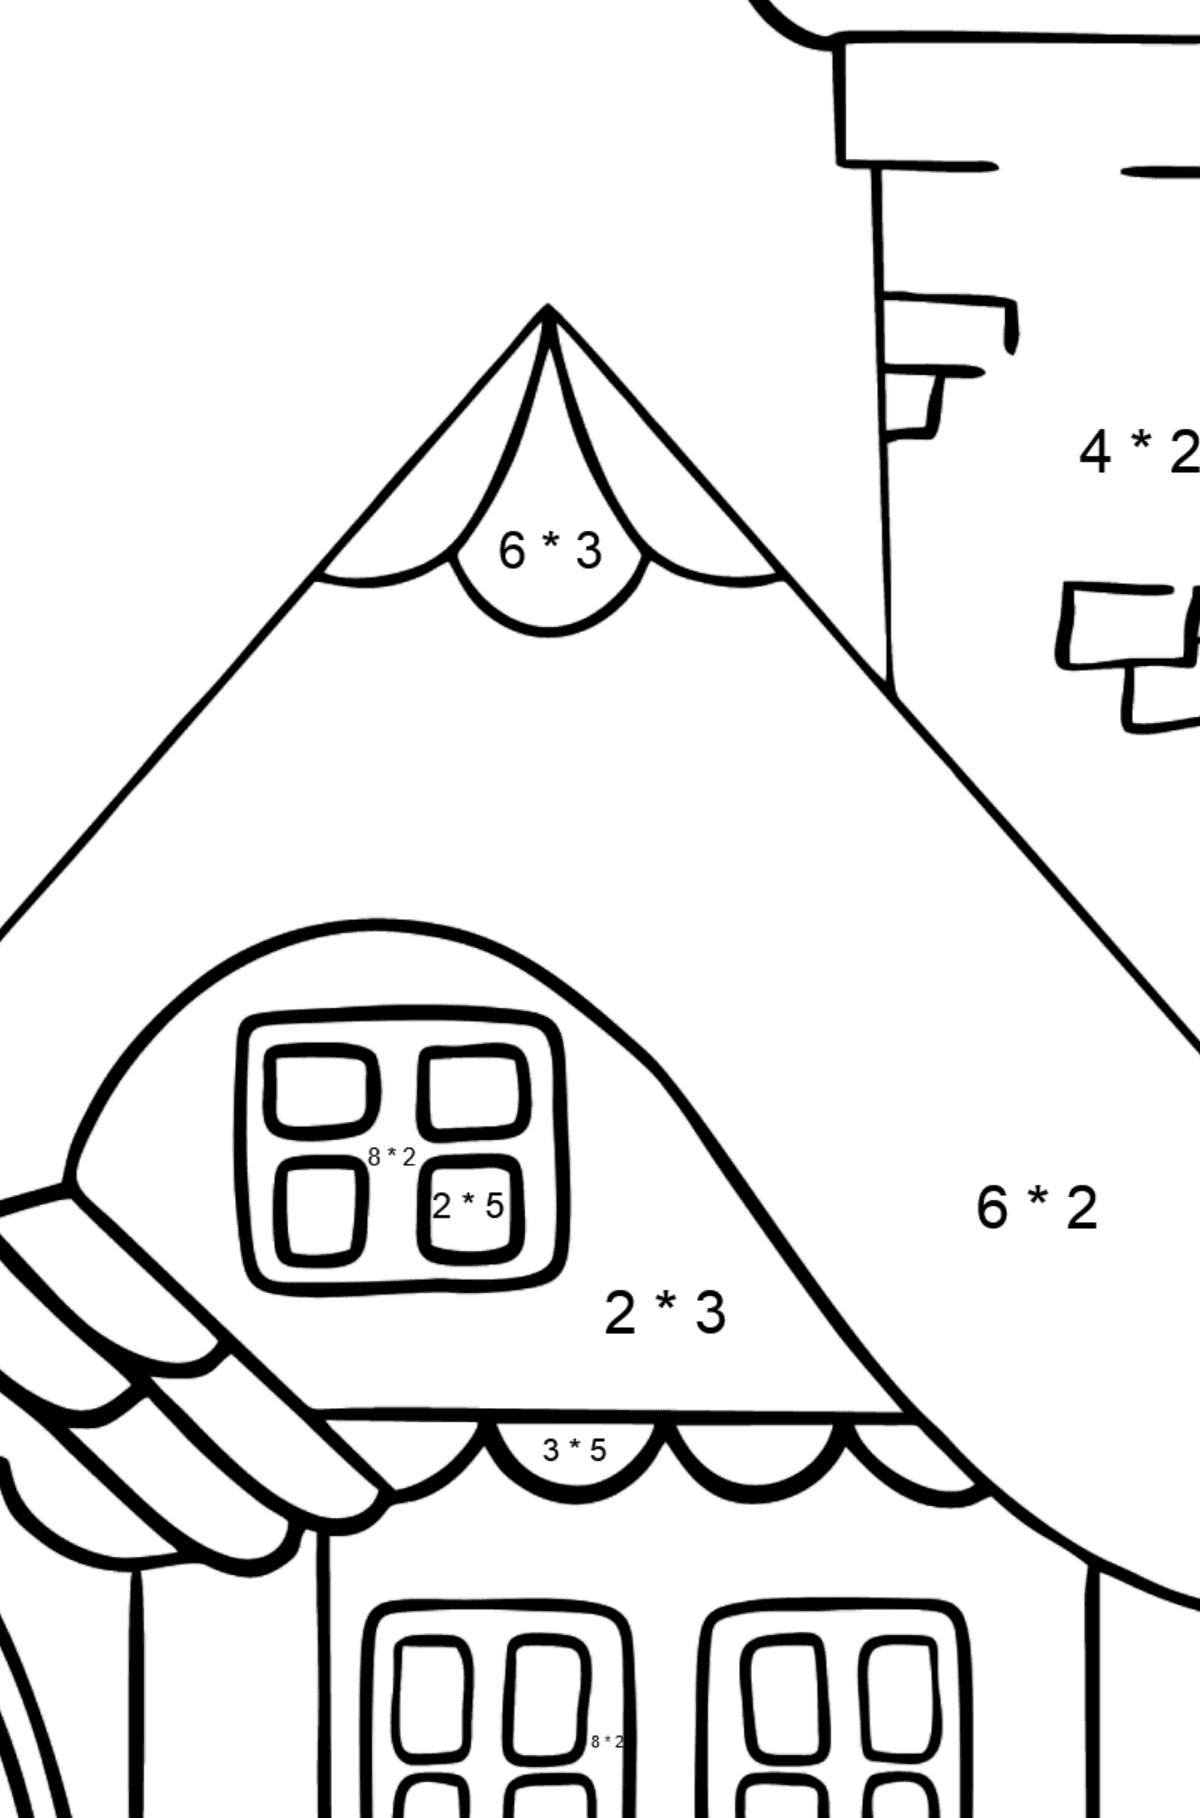 Coloring Page - A Wonderful House - Math Coloring - Multiplication for Kids